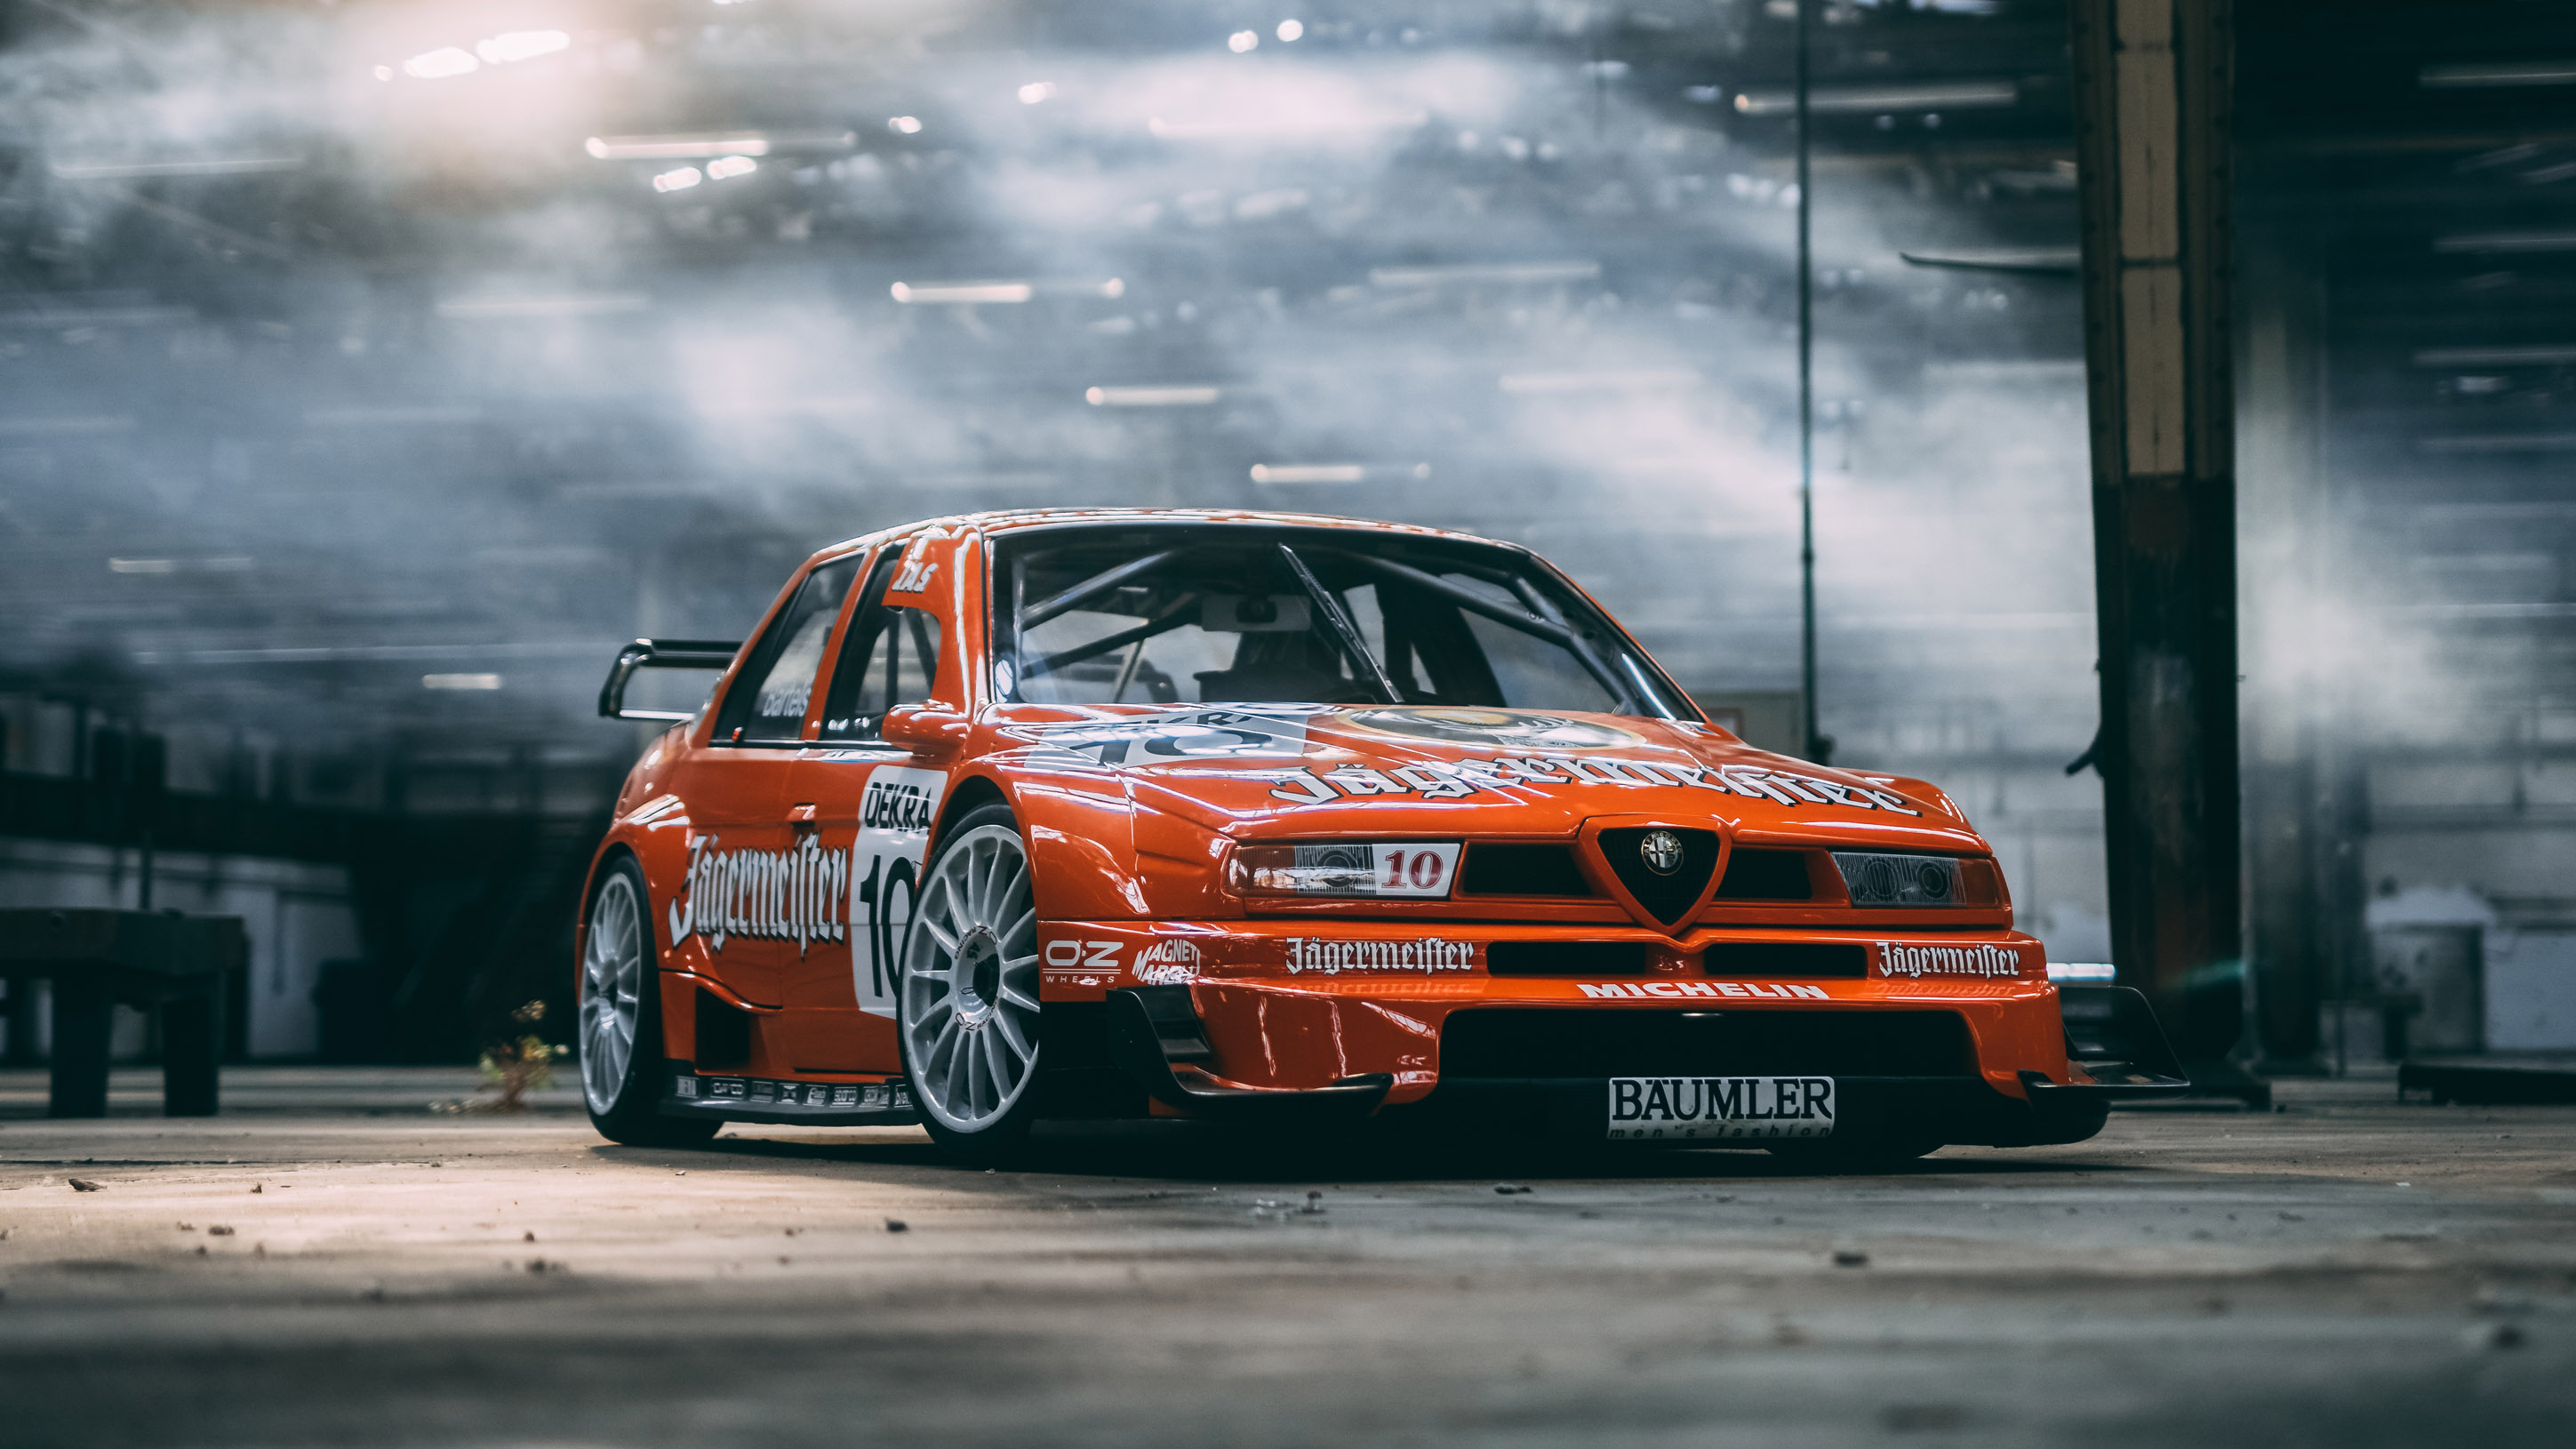 We want this Alfa Romeo 155 V6 TI more than anything else in the world